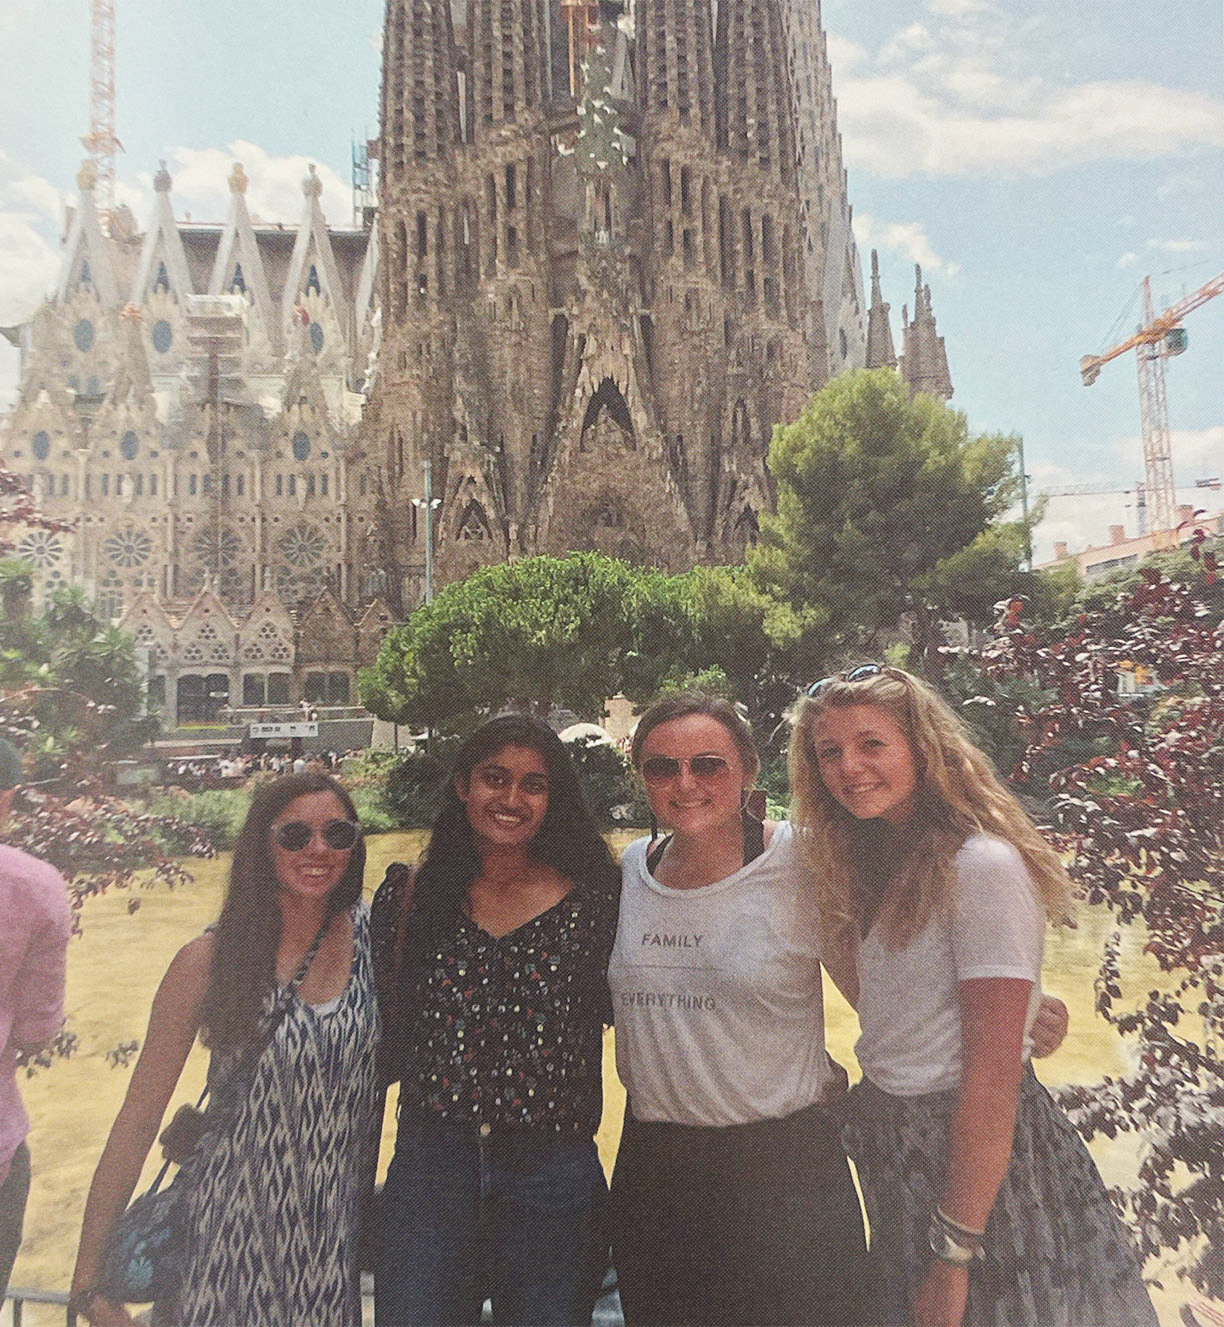 Richard's students take in one of his most memorable teaching moments in front of La Sagrada Familia.